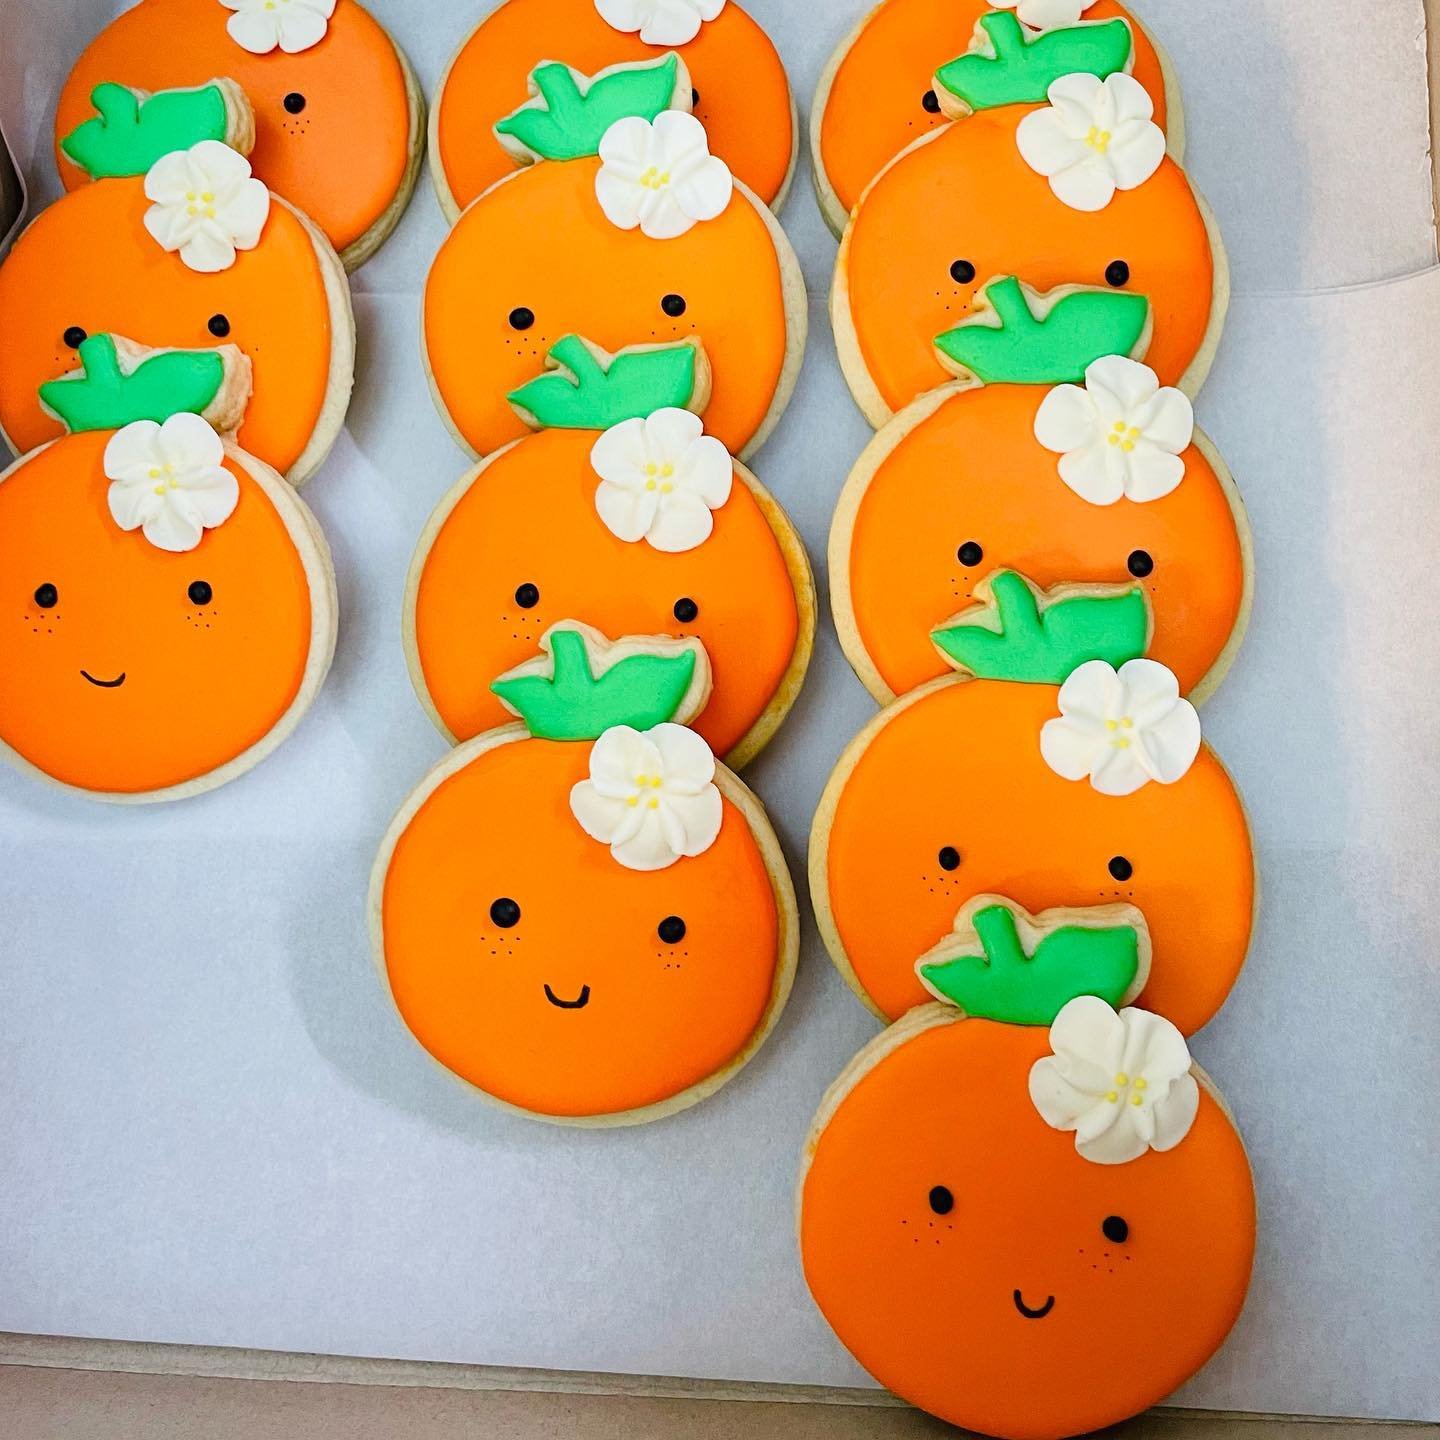 Welcoming a new member to your family? These Cutie and Onesie cookies are a perfect gift or Baby Shower dessert!